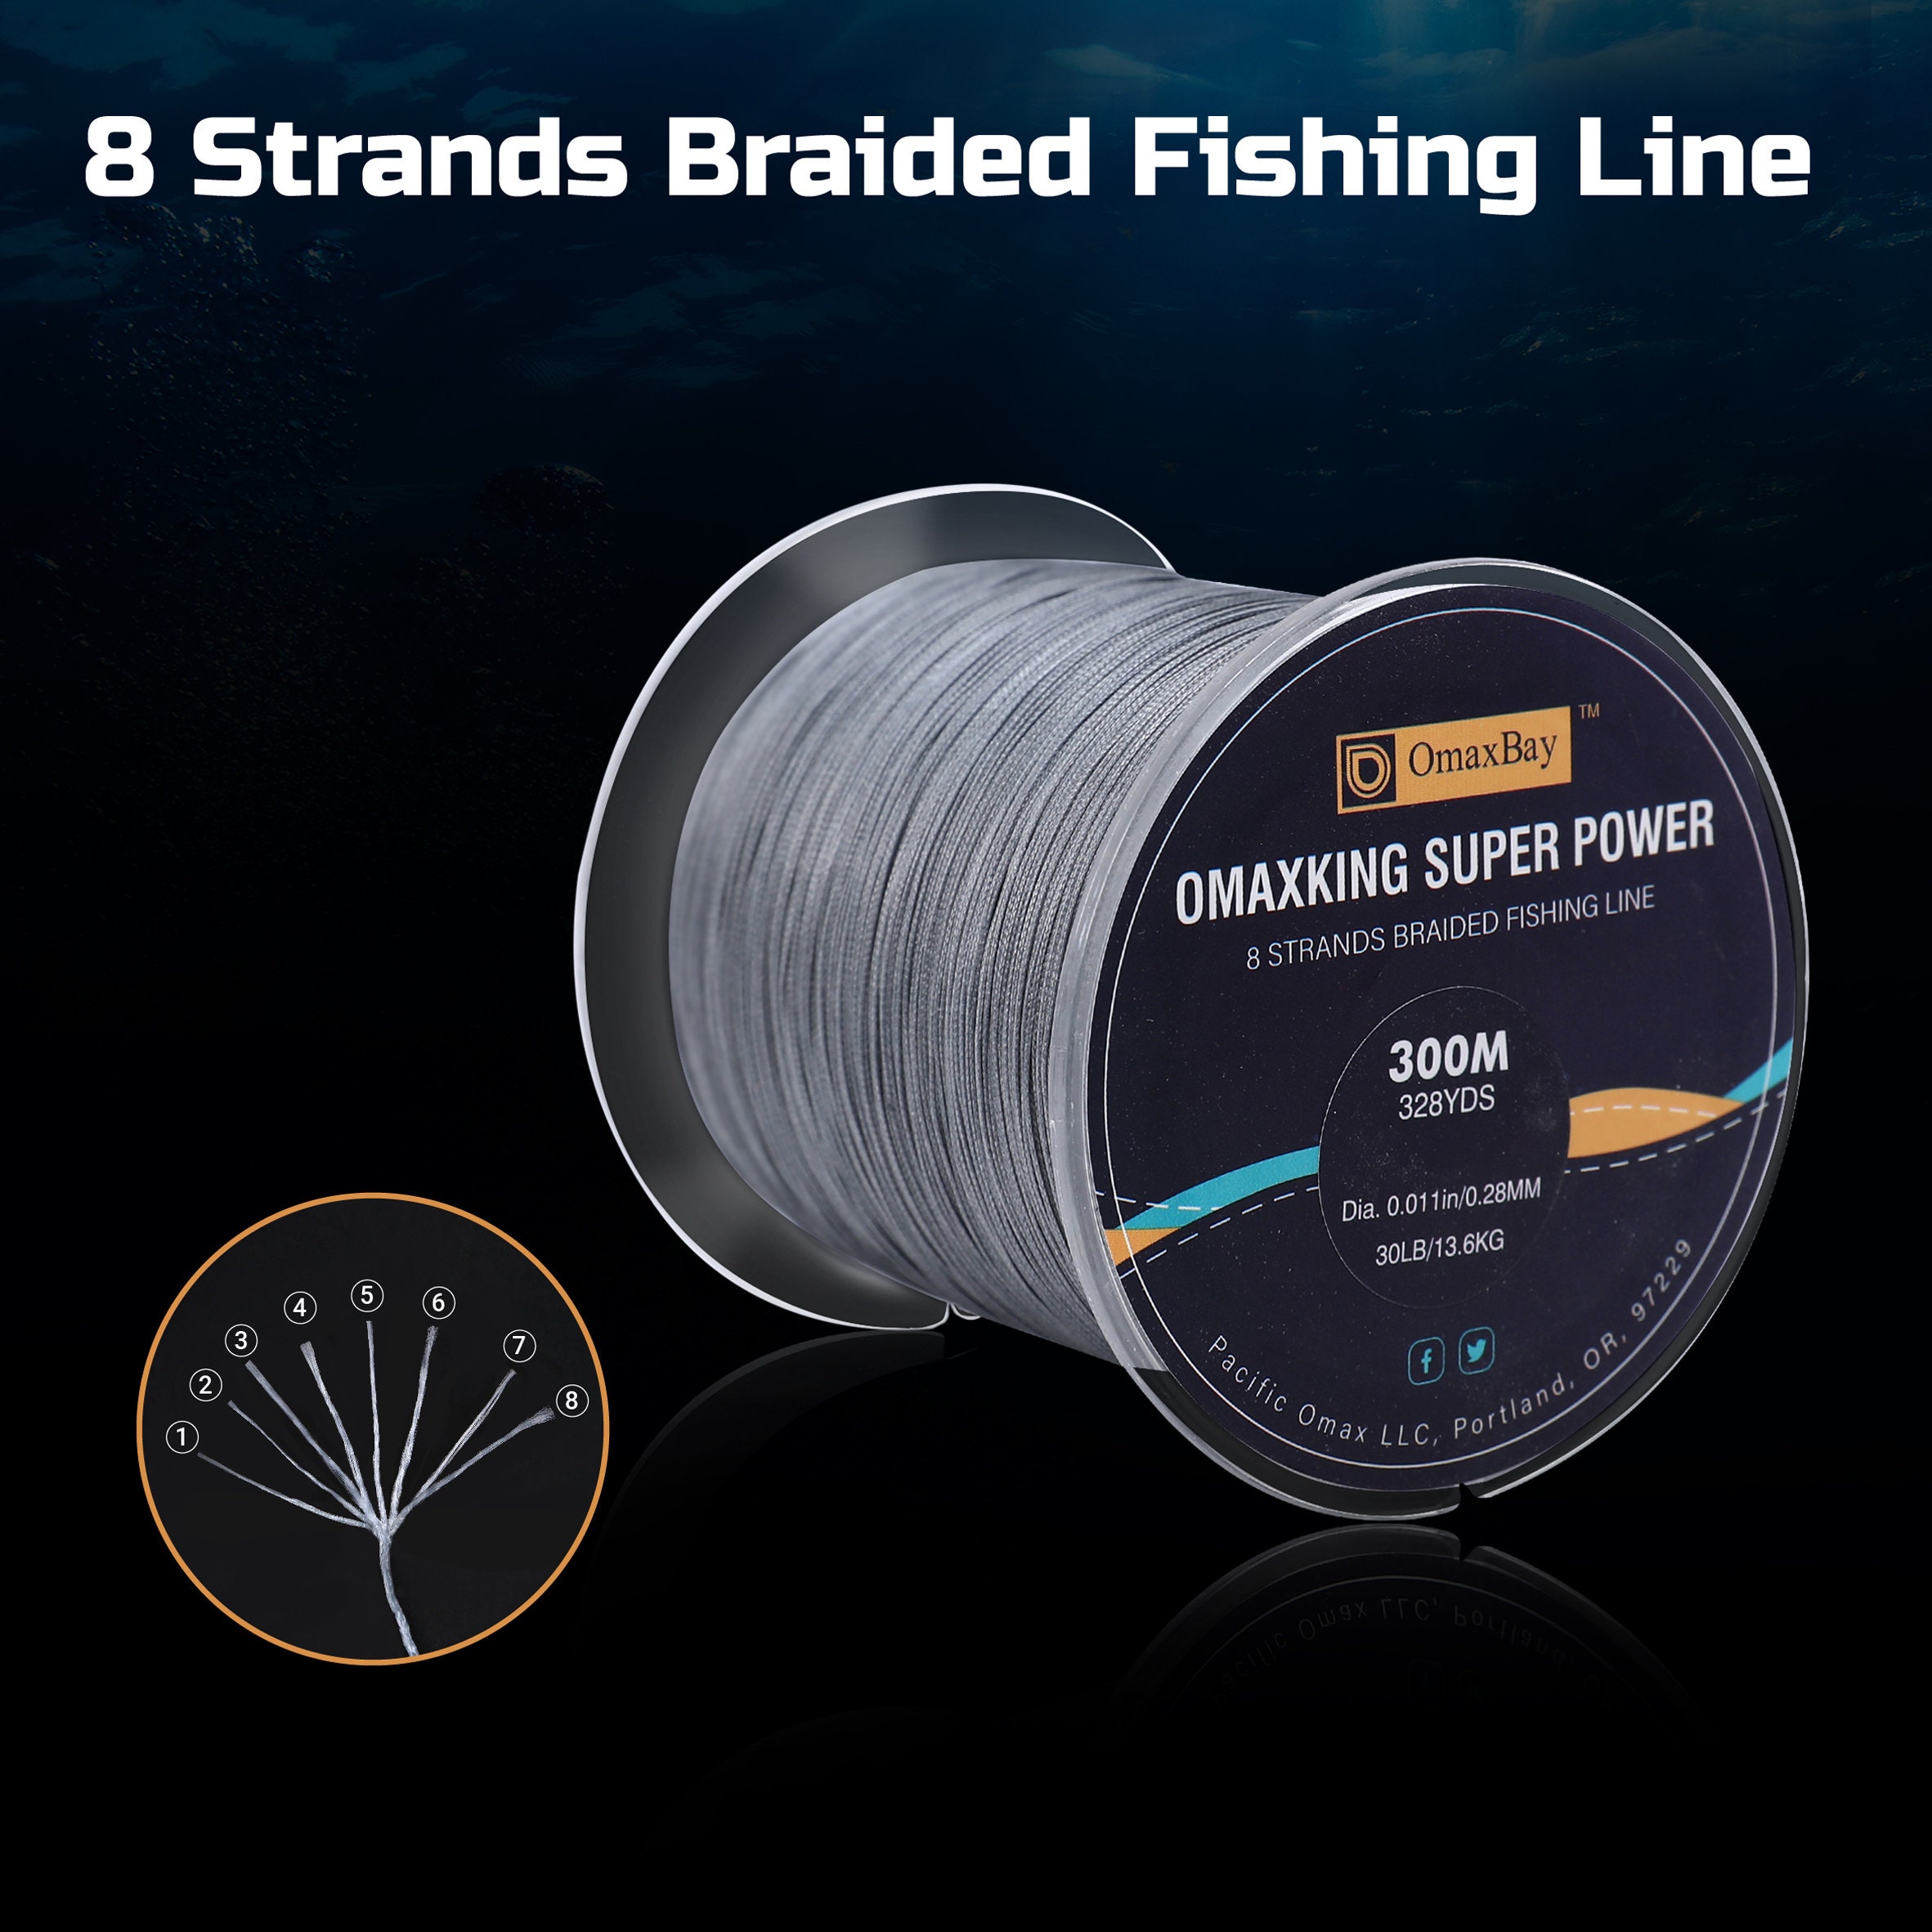 OMAXKING Super Power Braided Fishing Line 546yds Various Line Weight and  Diameter 8 Strands Multicolor -  Australia